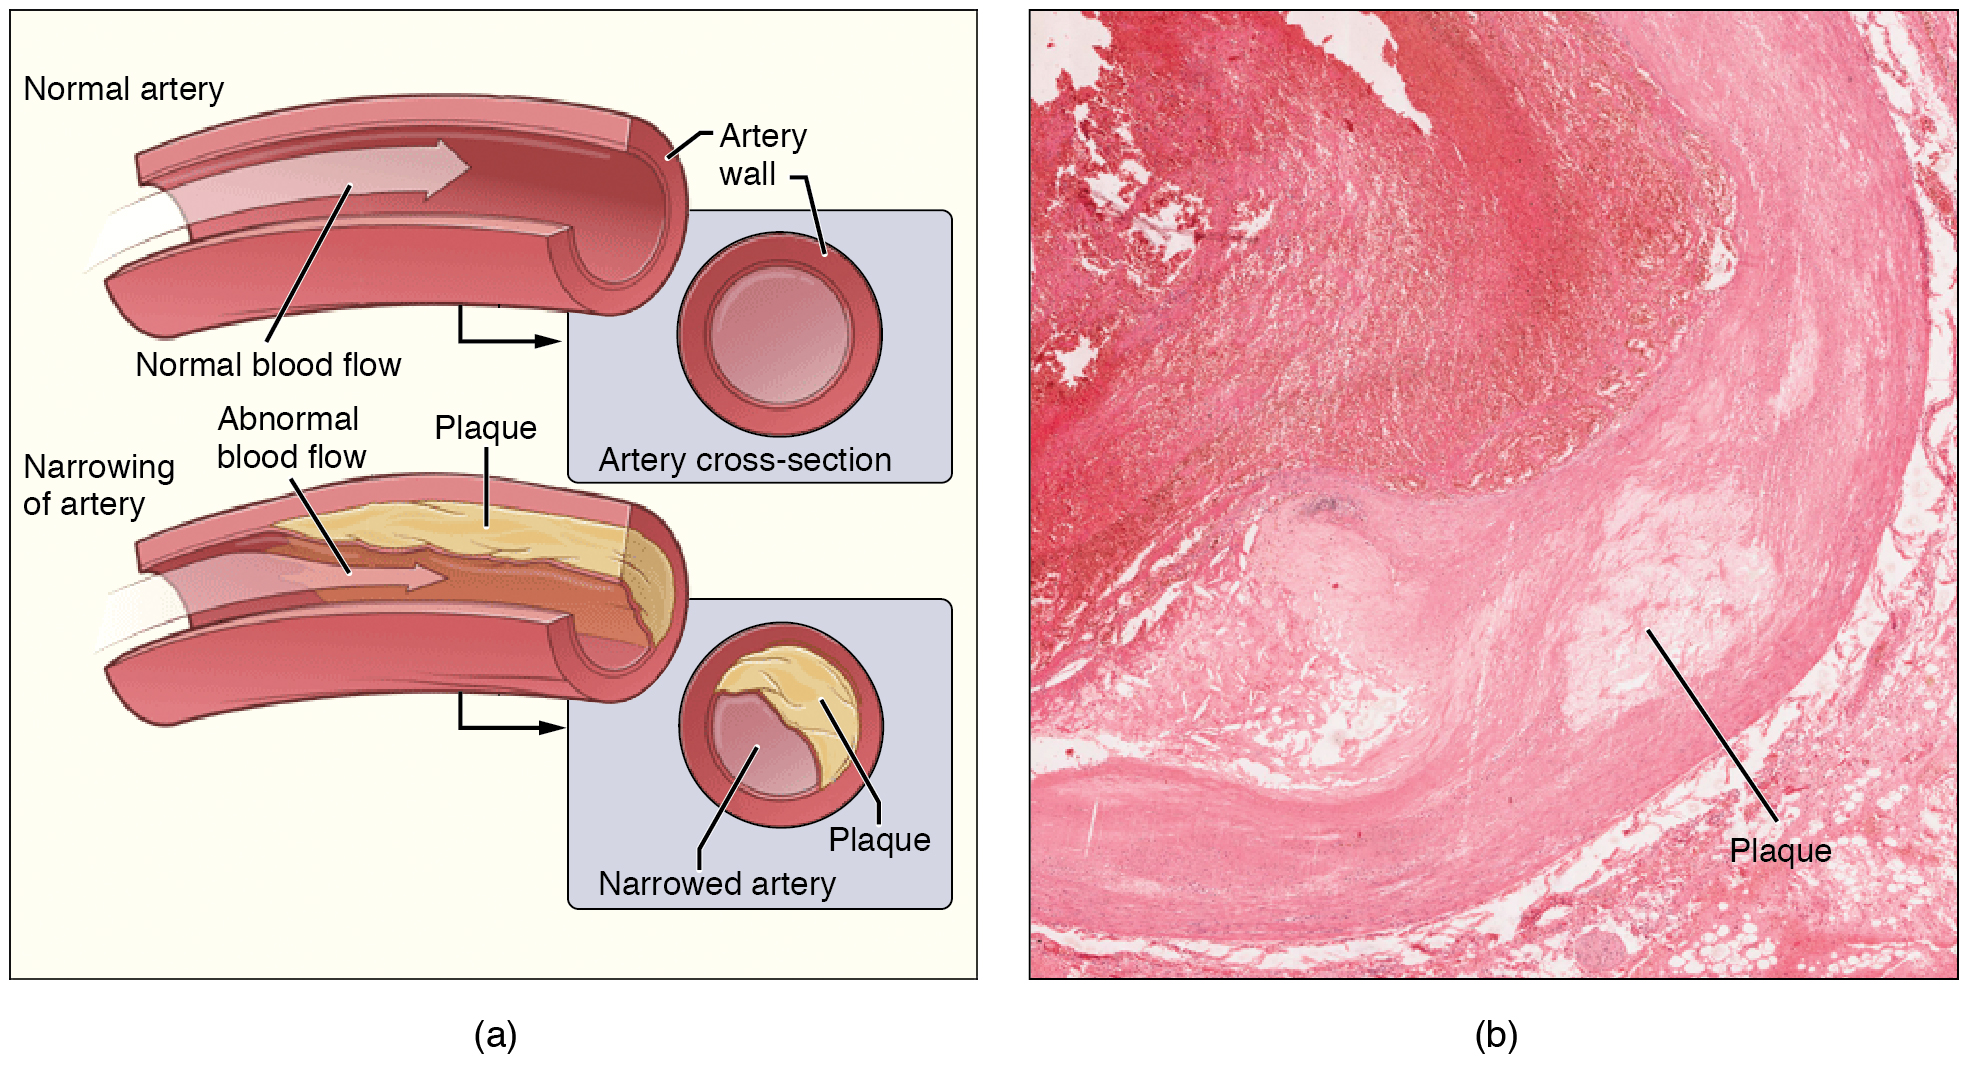 The left panel shows the cross-section of a normal and a narrowed artery. The right panel shows a micrograph of an artery with plaque in it.